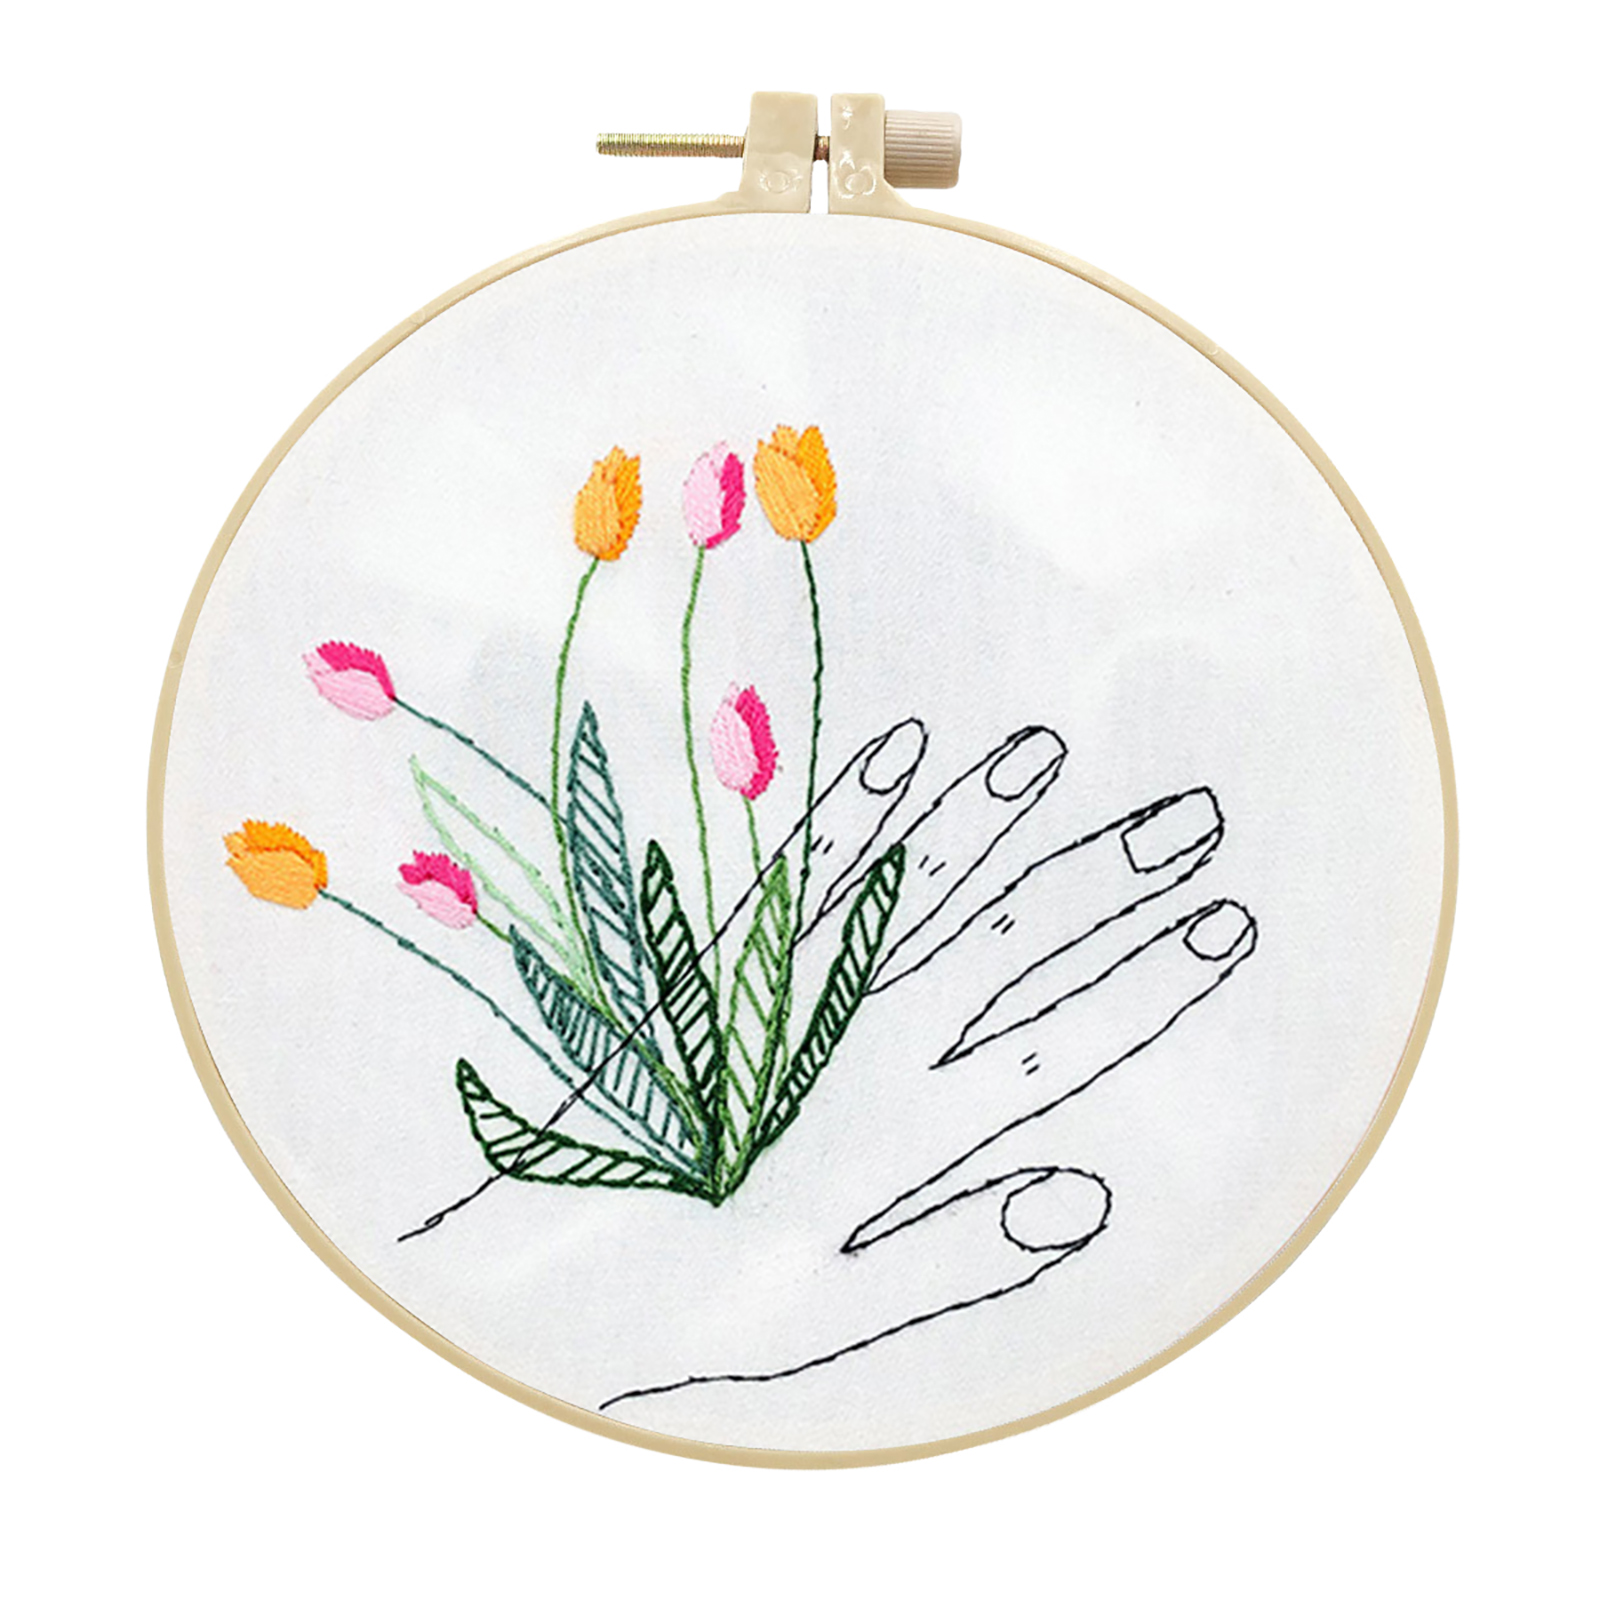 Handmade Embroidery Kit Cross stitch kit for Adult Beginner - Handful of Tulip Pattern